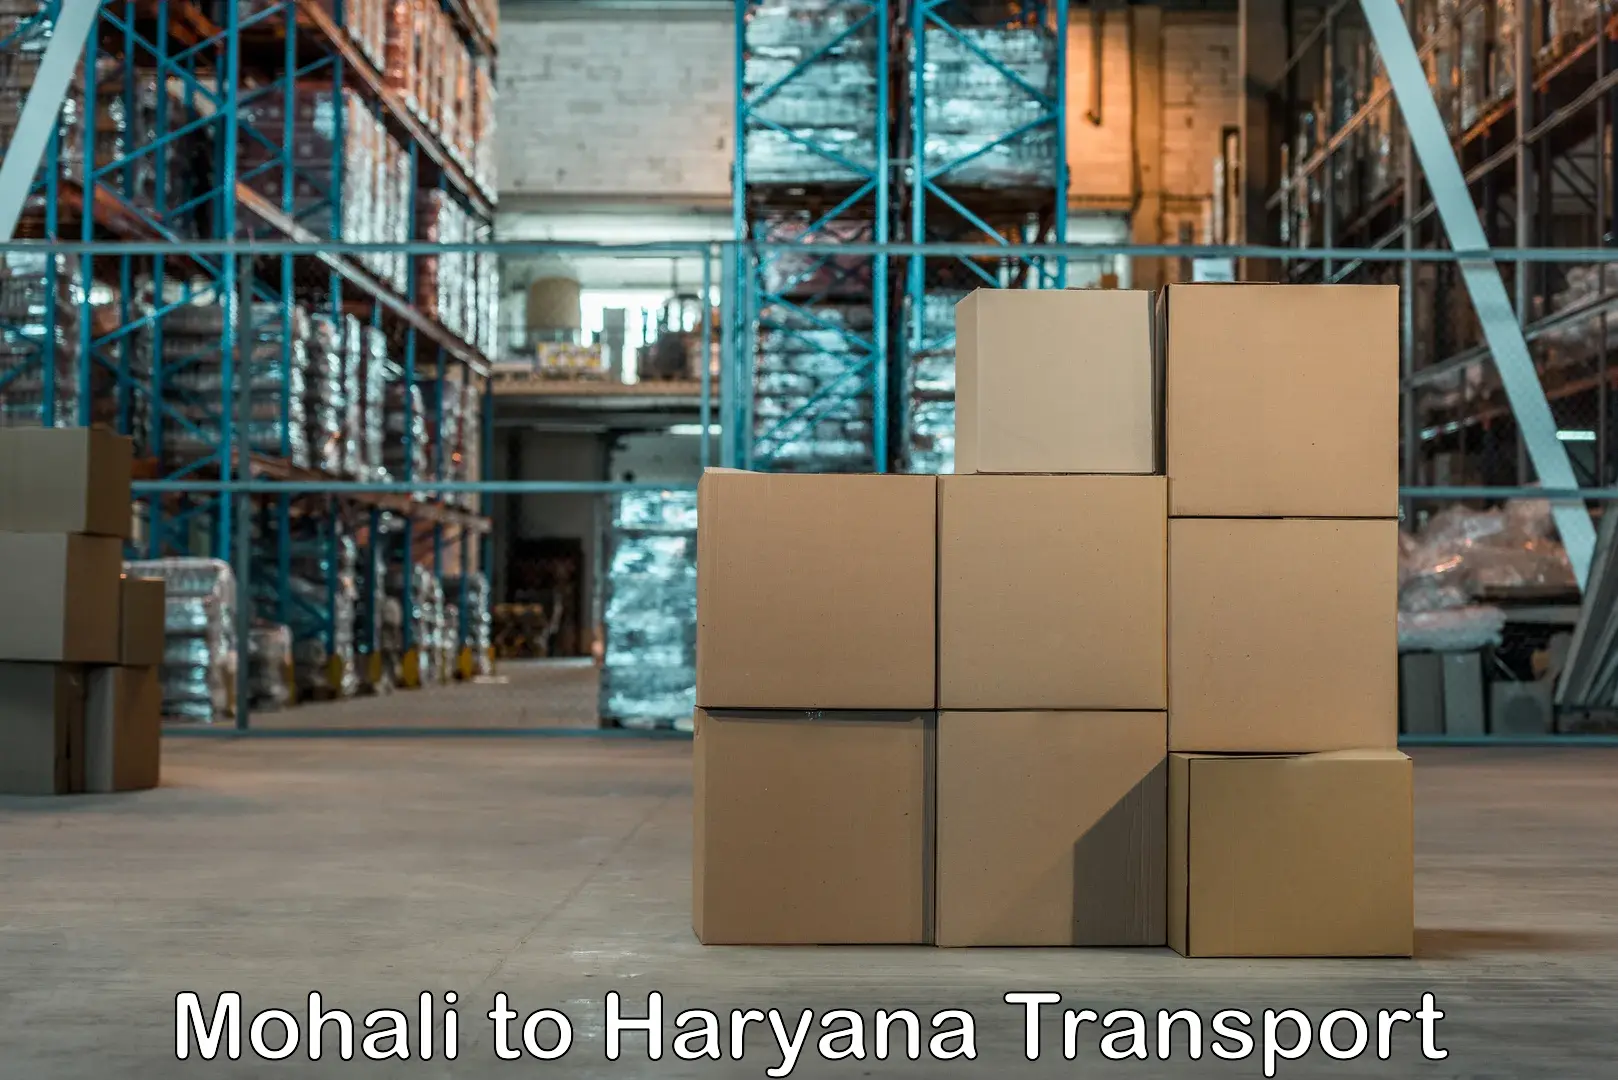 Transport in sharing in Mohali to Panipat